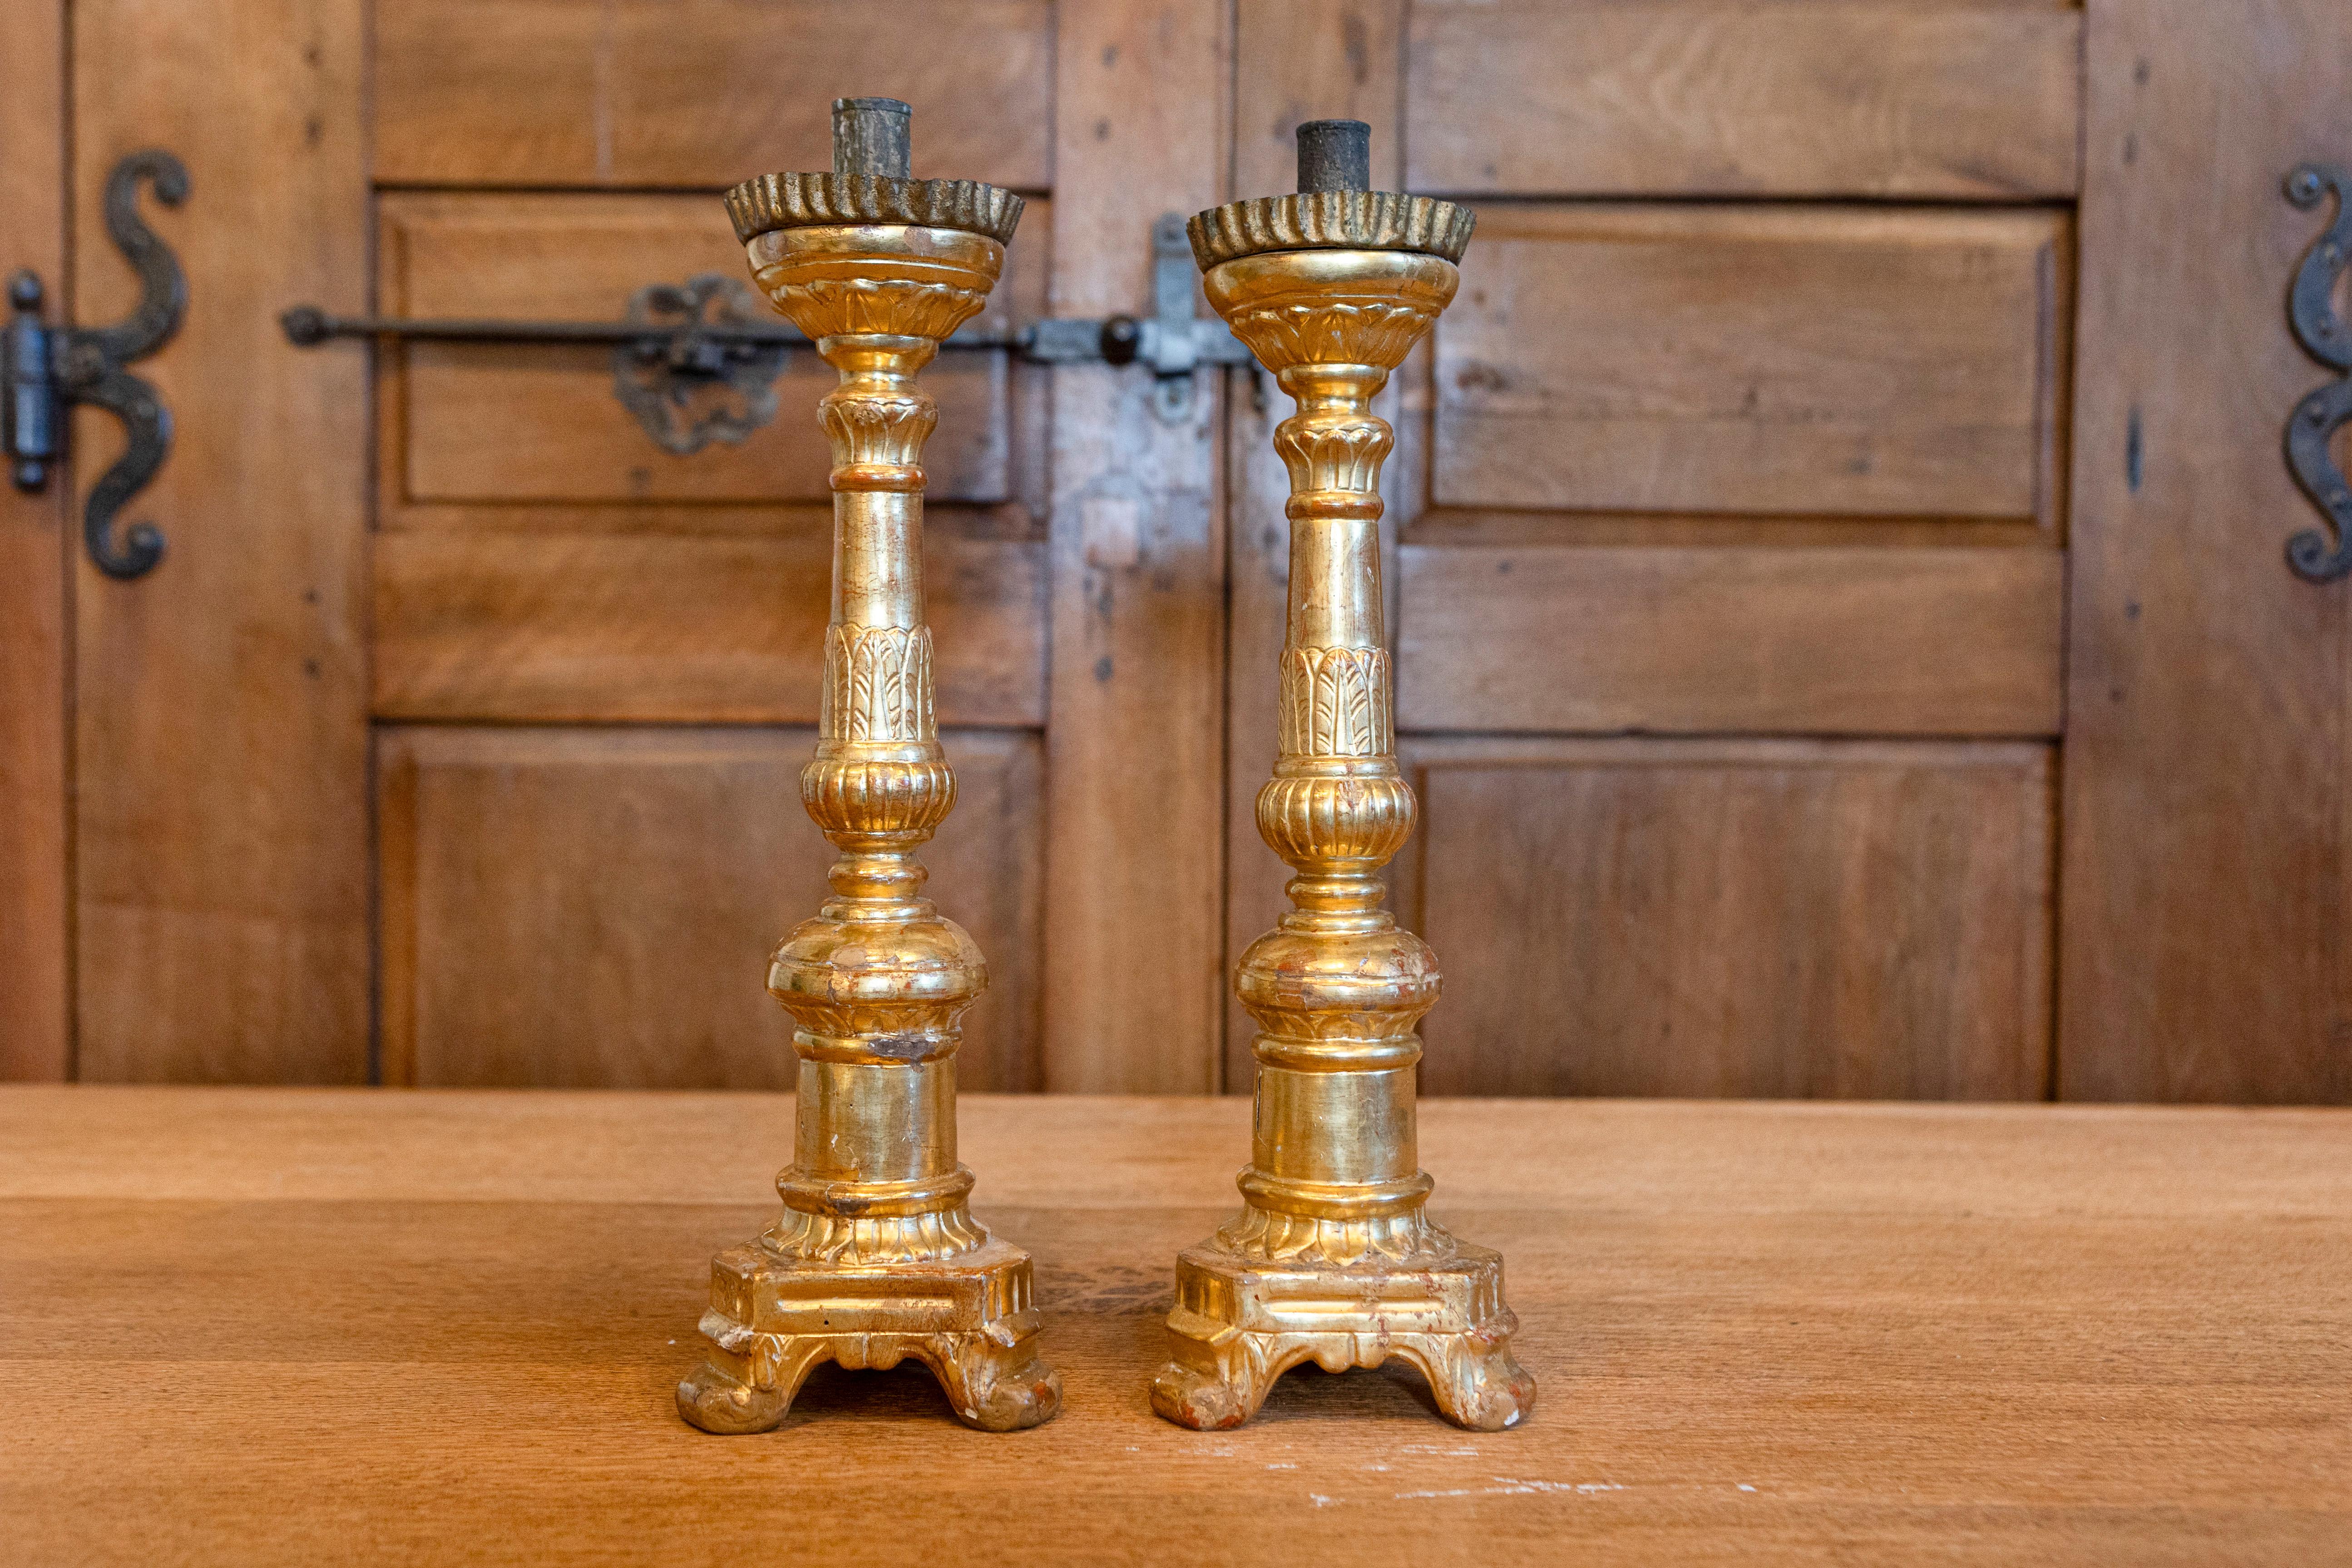 A pair of Italian Louis Philippe carved giltwood candlesticks from the mid 19th century with foliage and tripod bases. This exquisite pair of Italian Louis Philippe carved giltwood candlesticks from the mid-19th century epitomizes elegance and